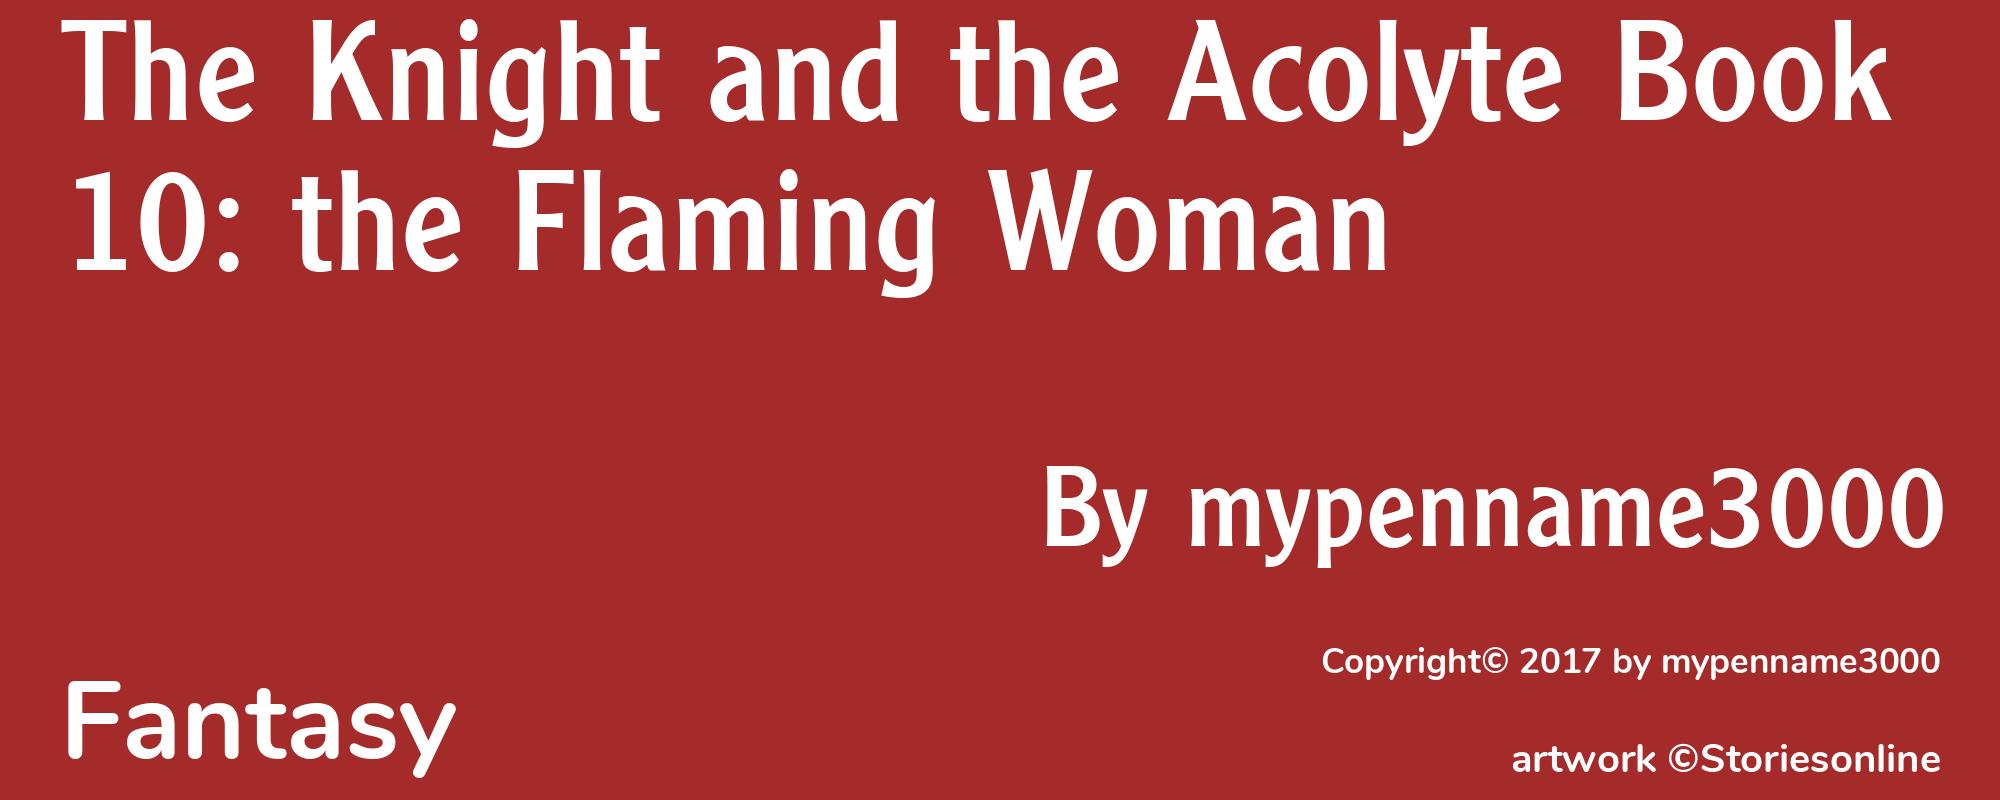 The Knight and the Acolyte Book 10: the Flaming Woman - Cover